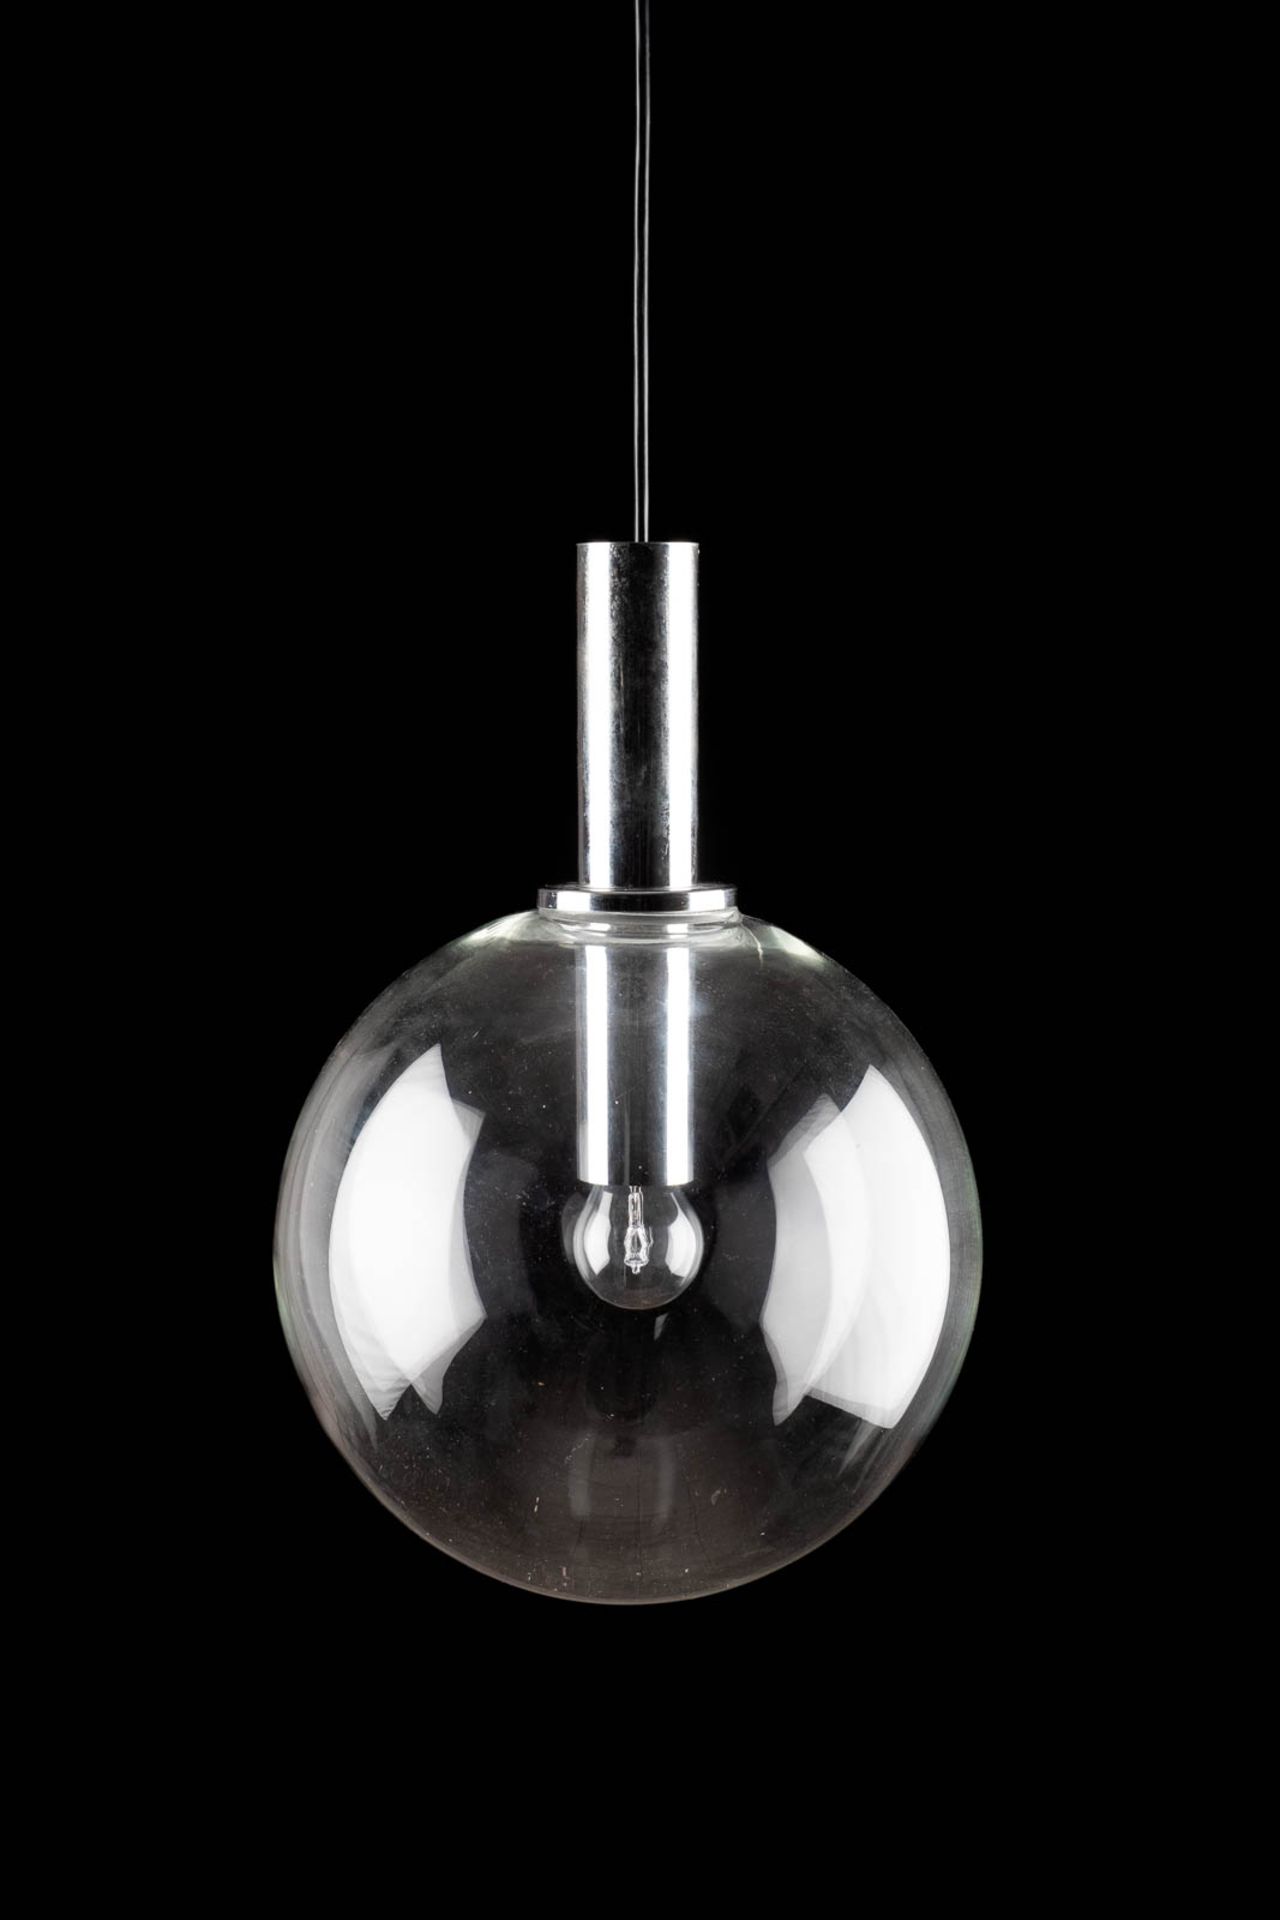 CEILING LIGHT 'CRYSTAL BALL'Probably German, 1970s/1980s Glass, metal, part. chromed. Total length